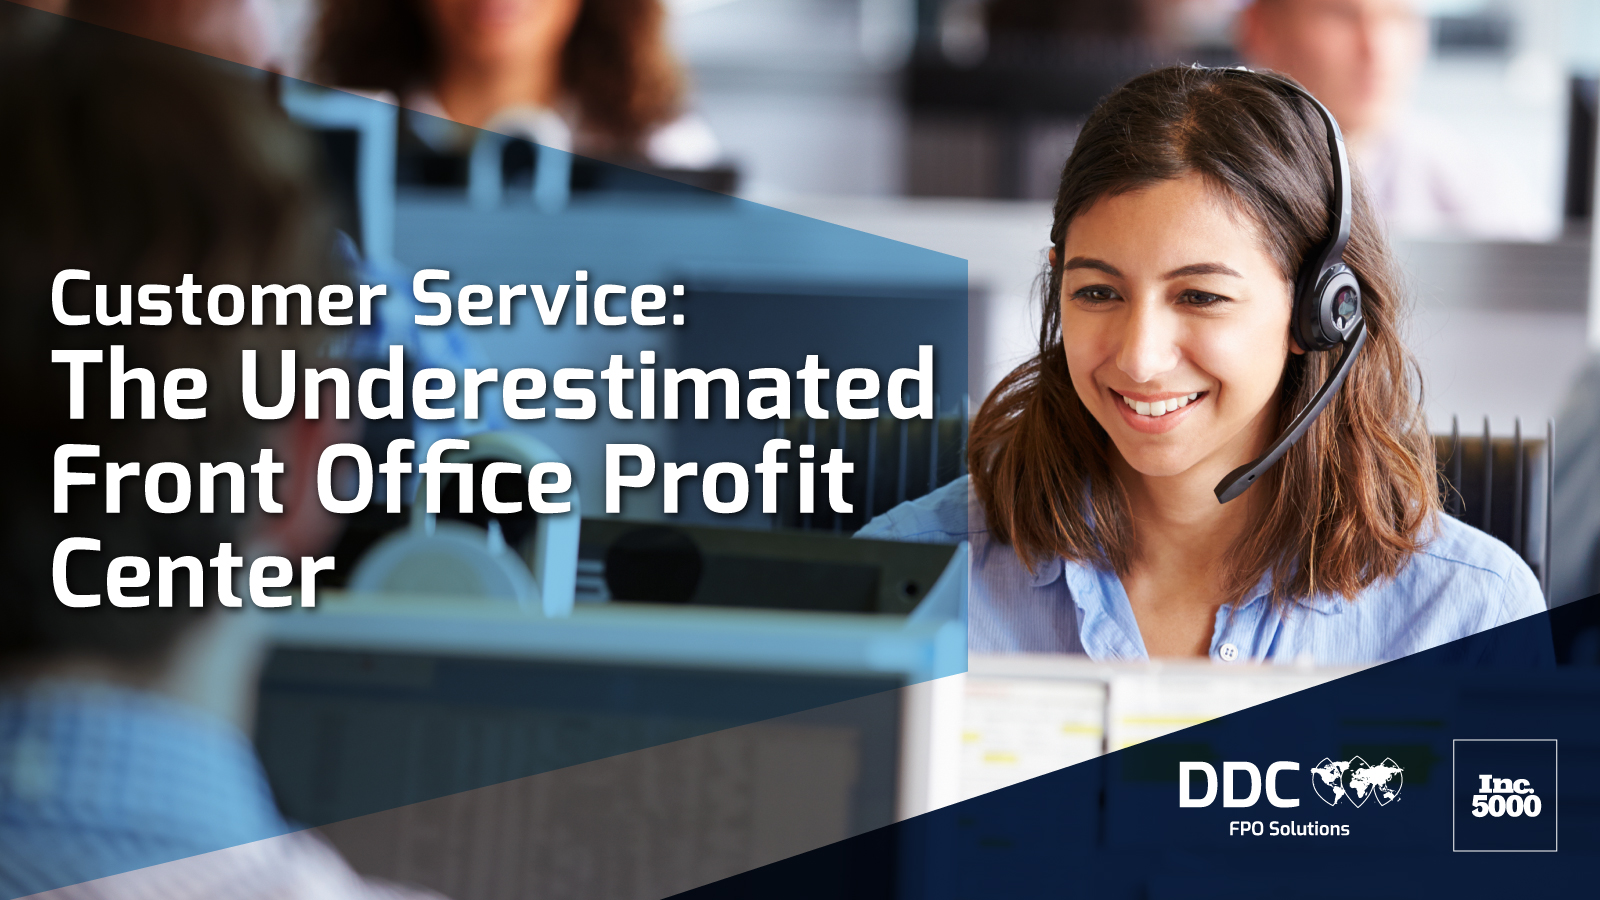 Customer Service: The Underestimated Front Office Profit Center